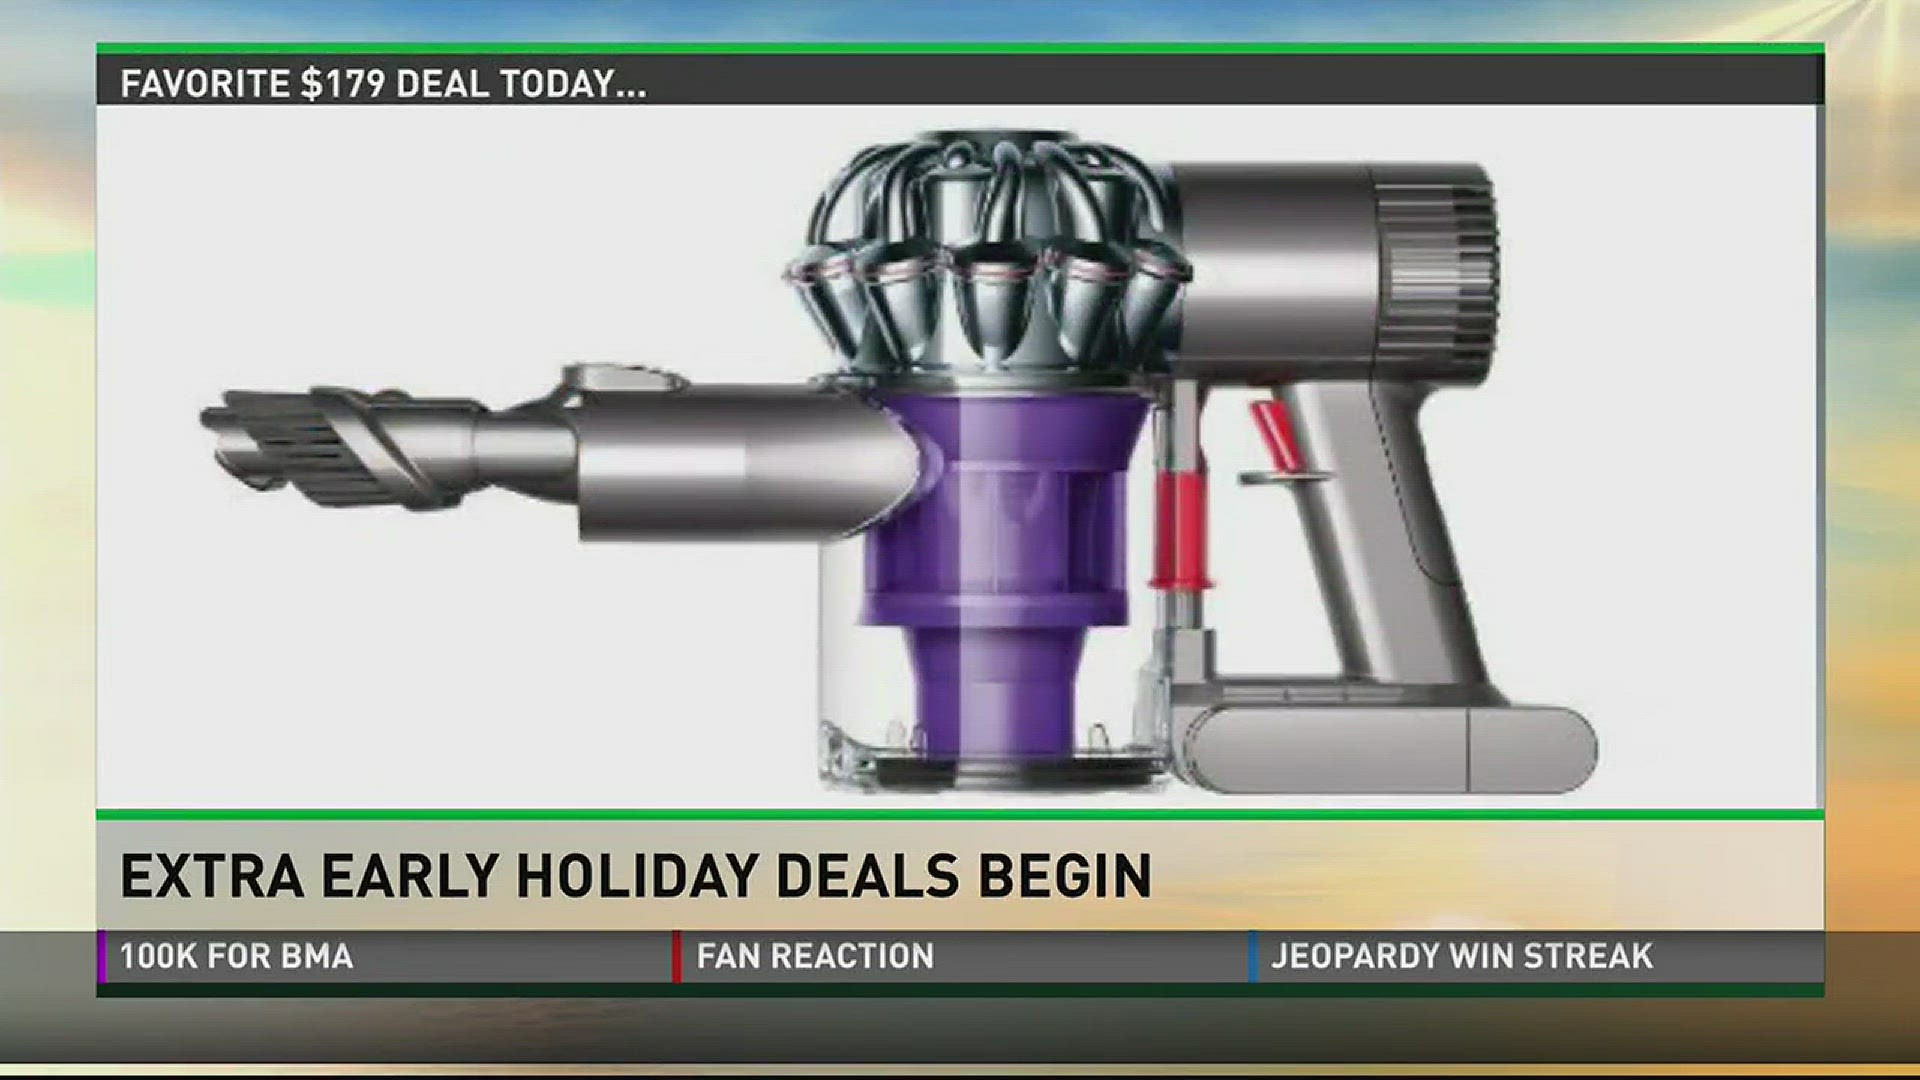 Money man Matt Granite shows how to save on Dyson vacuuming products.